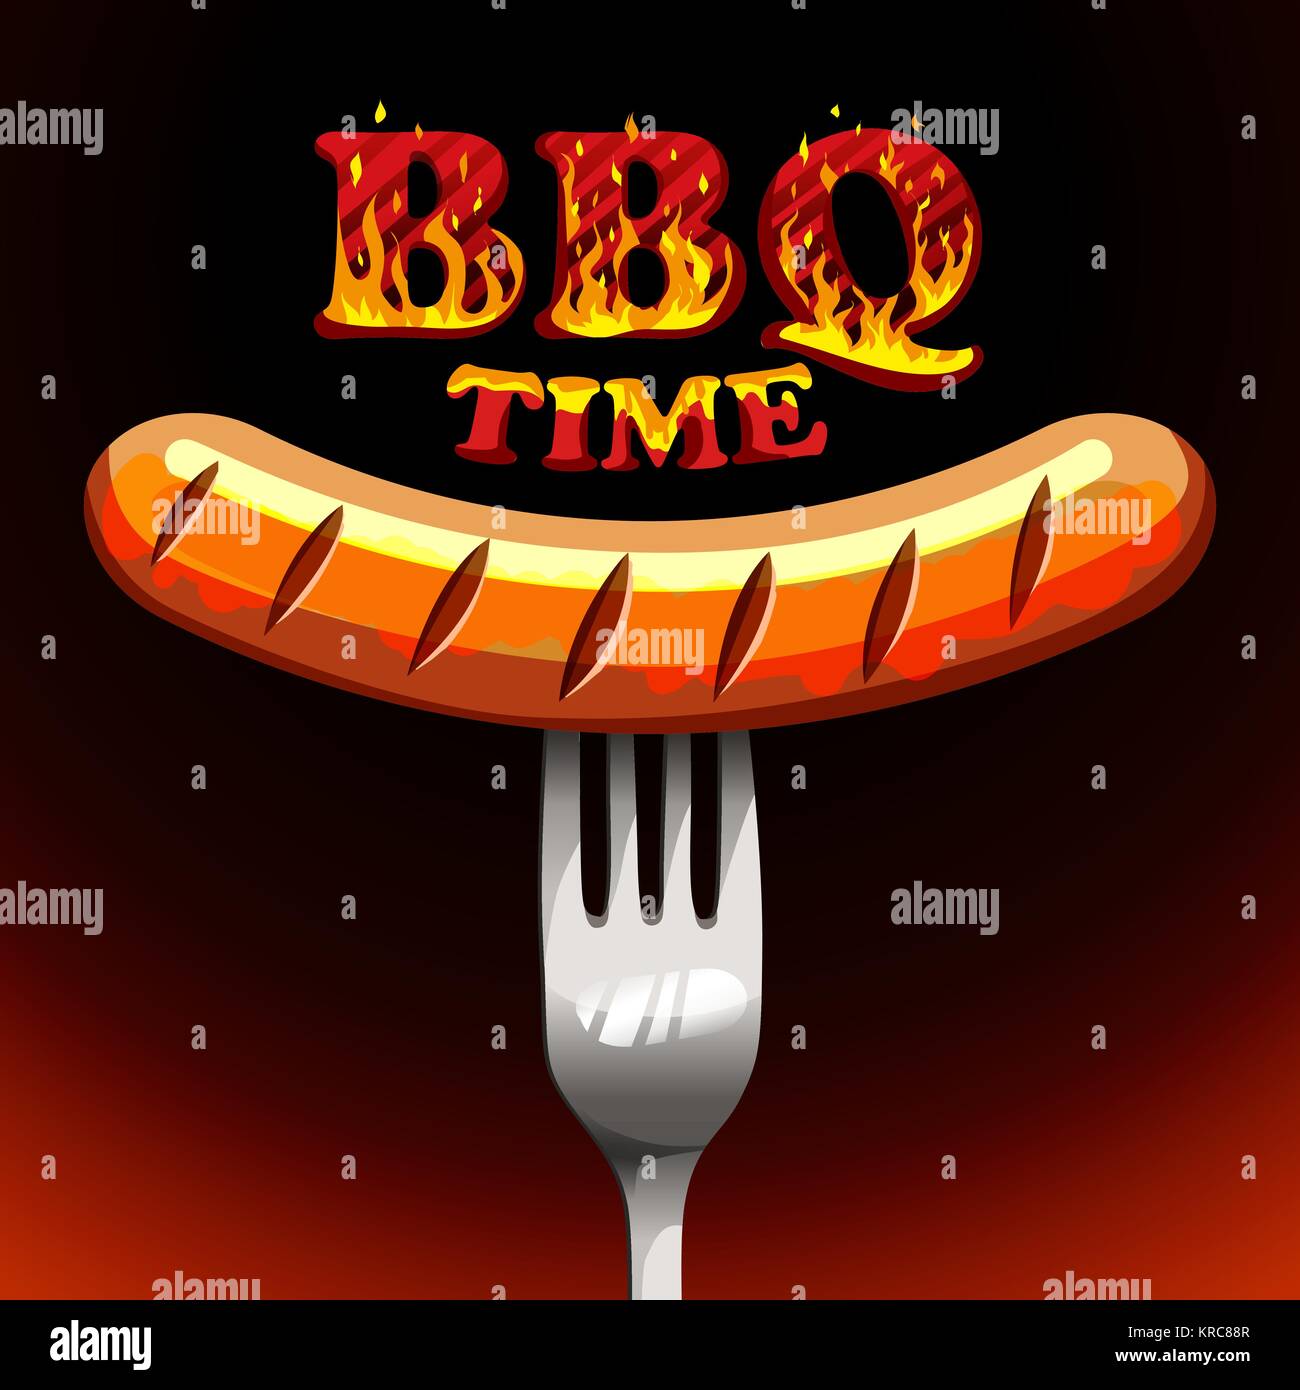 BBQ time - Photorealistic sausage on a fork. Stock Vector